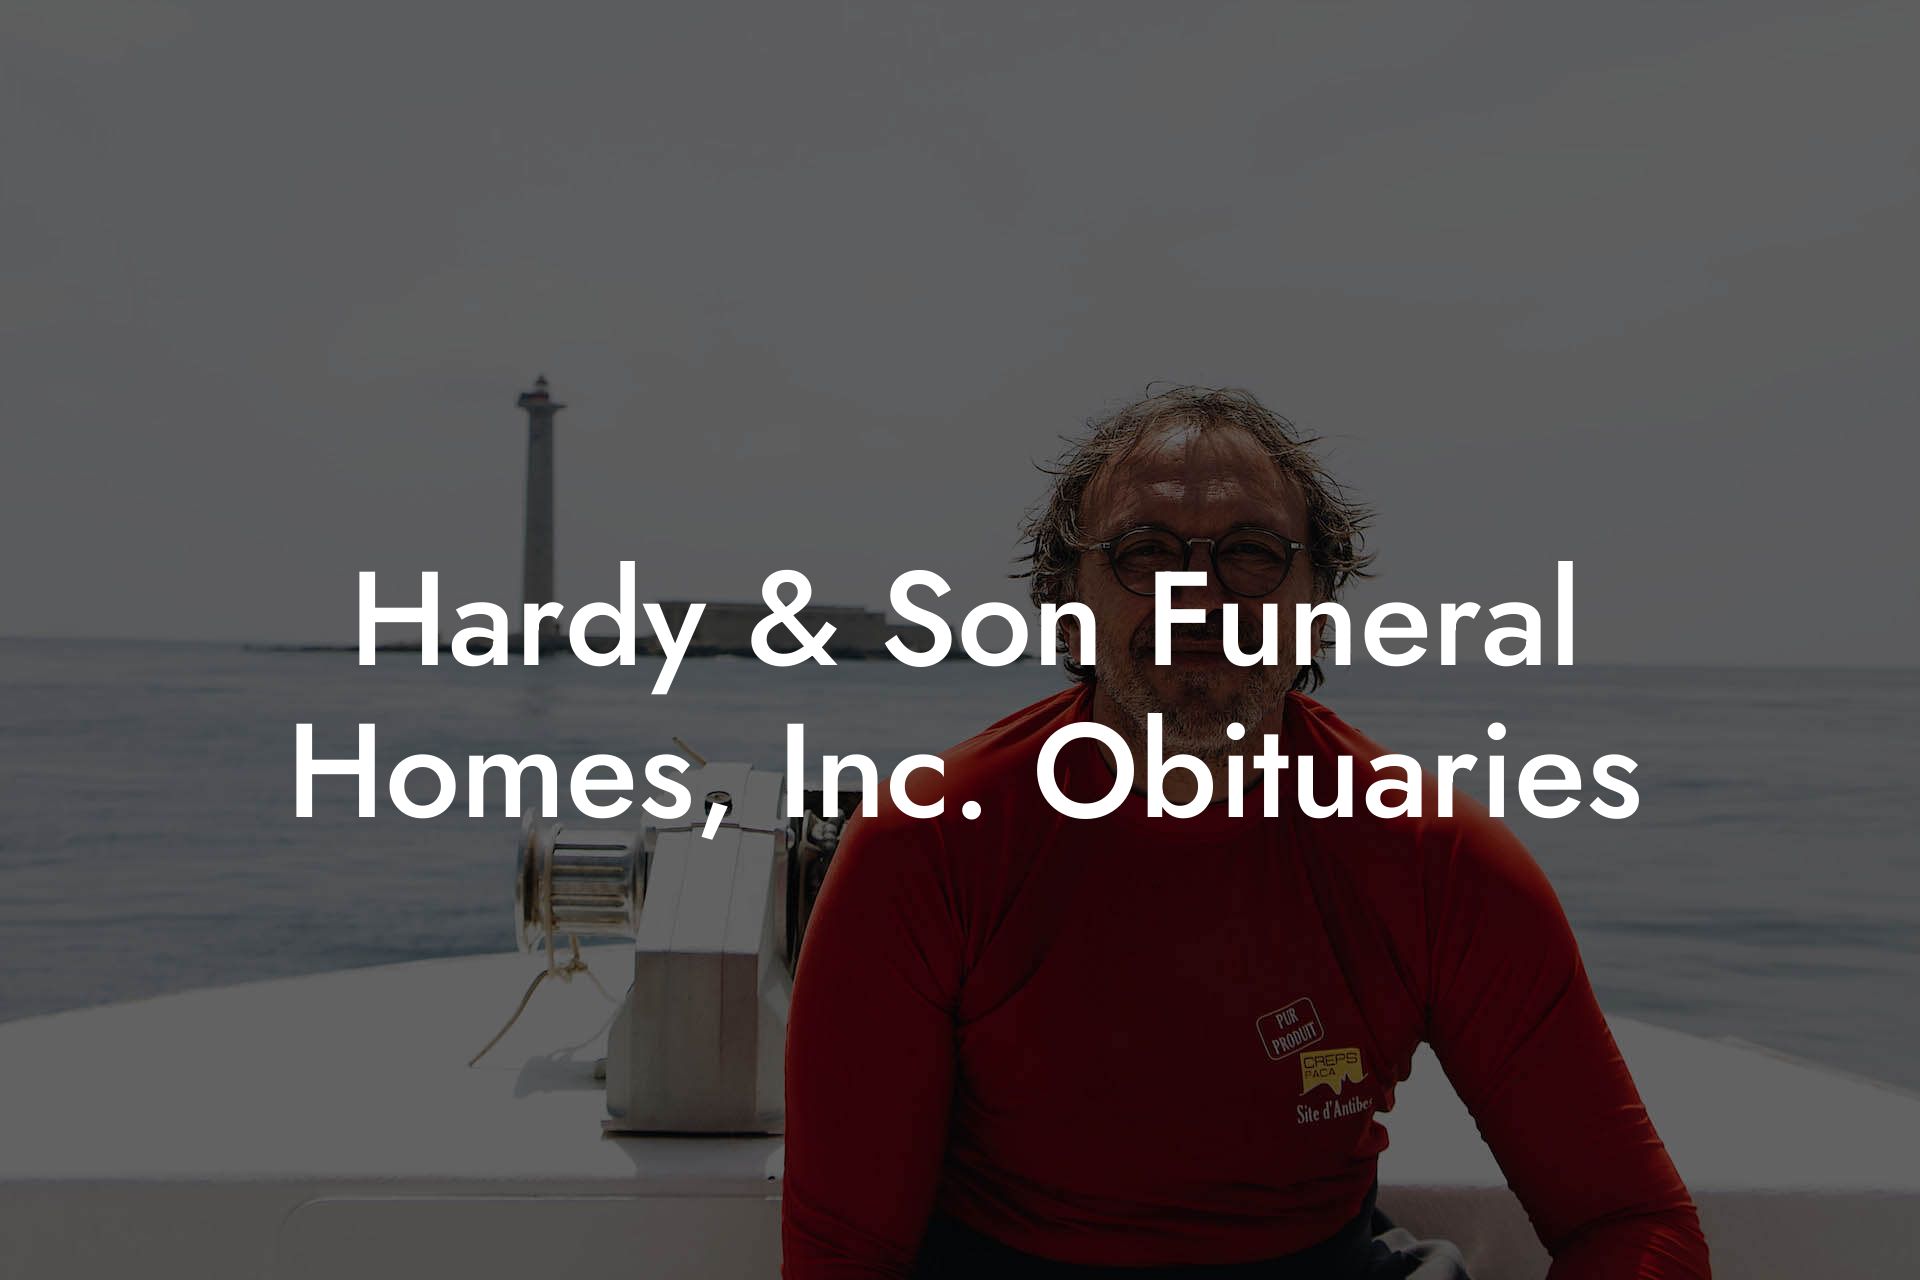 Hardy & Son Funeral Homes, Inc. Obituaries